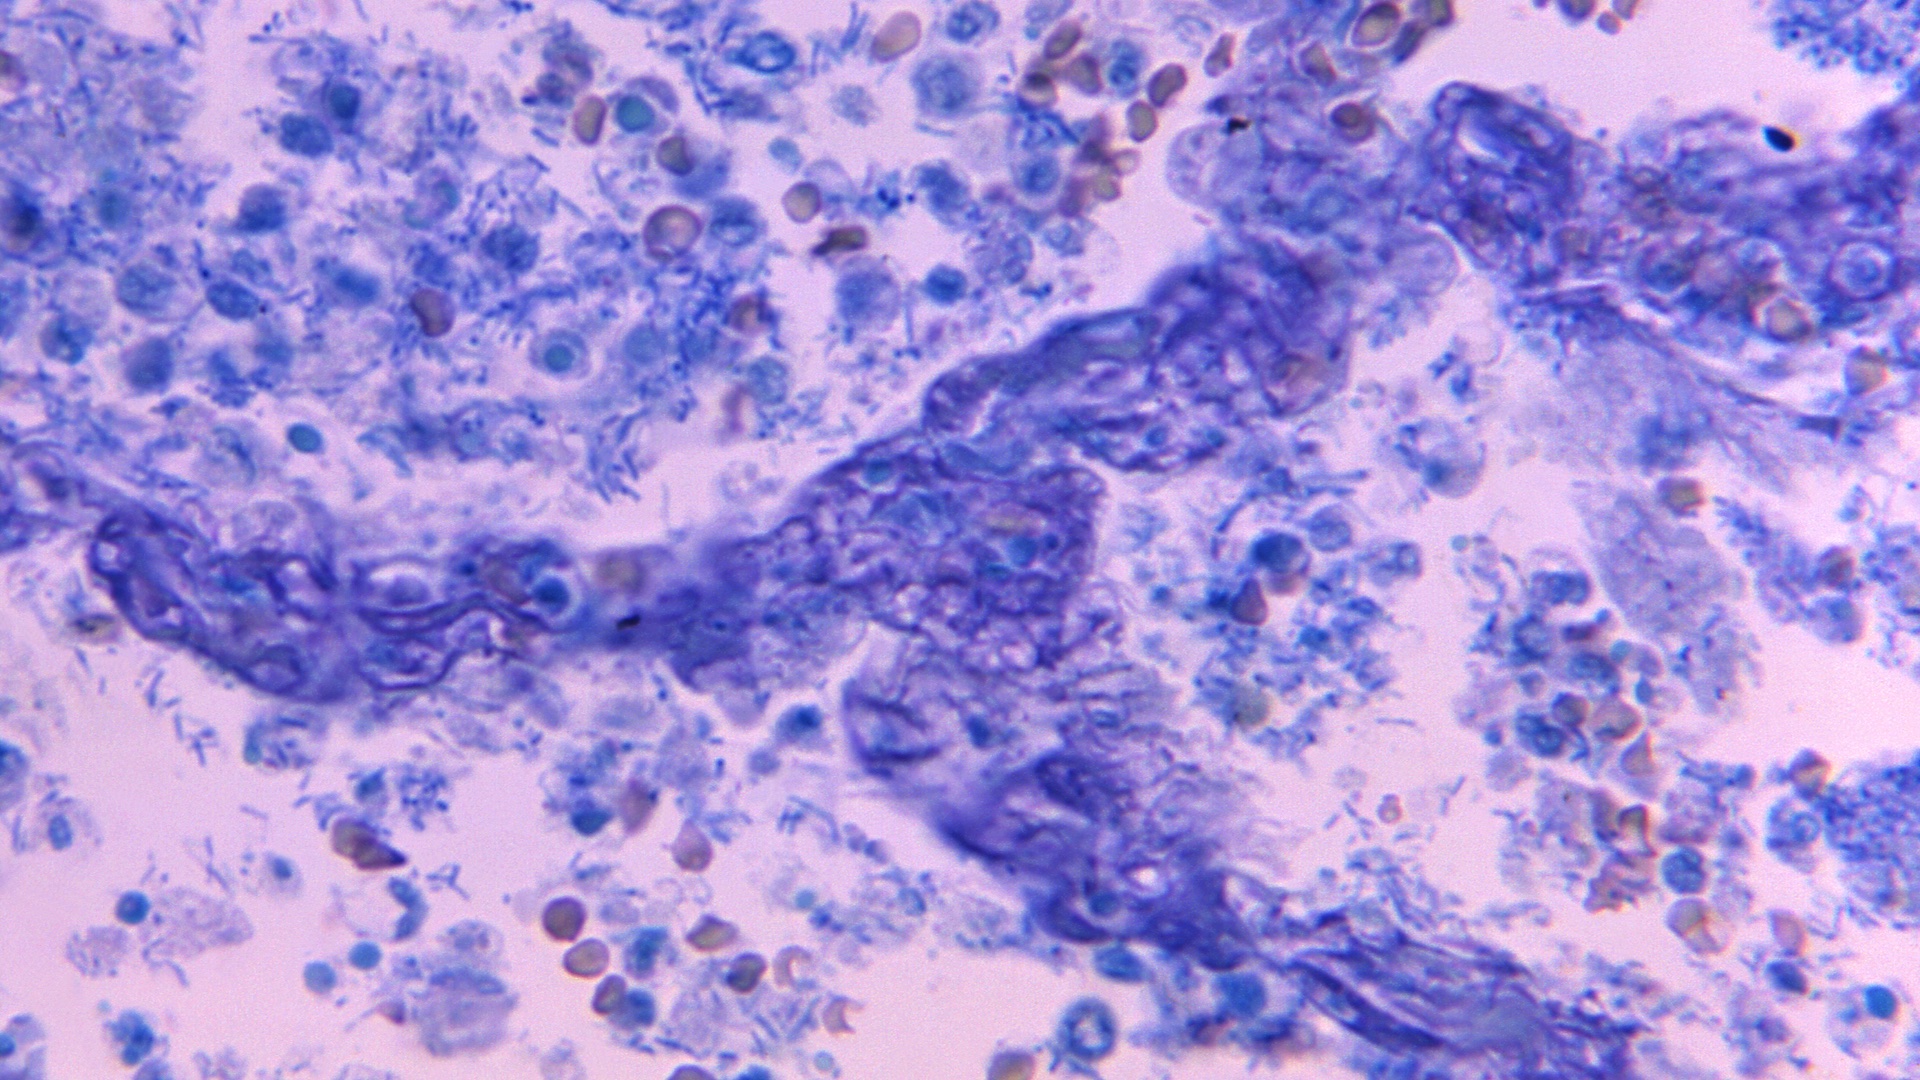 a photomicrograph of a lung tissue sample from a patient with secondary plague pneumonia